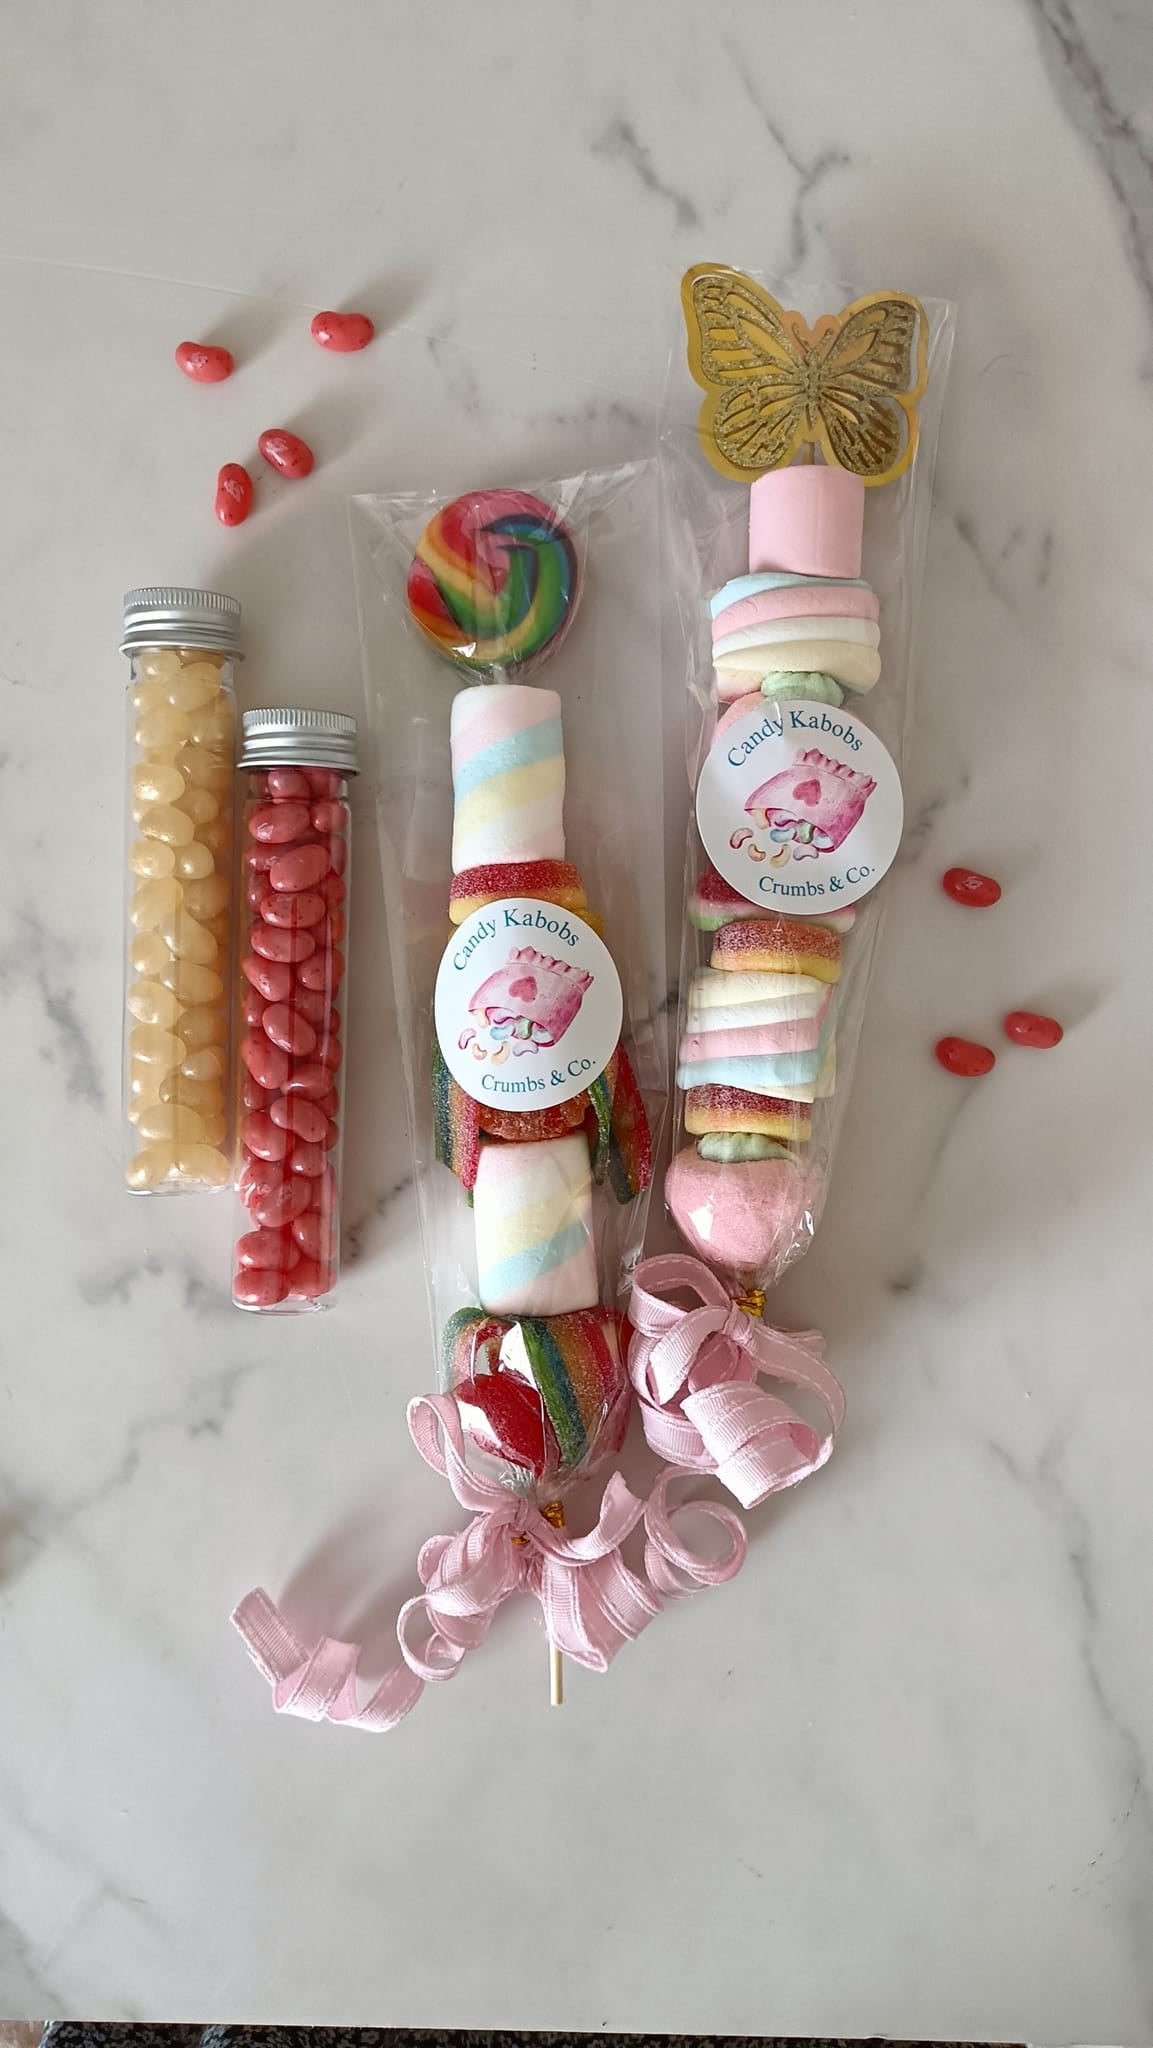 Candy Kabobs by Crumbs and Co.